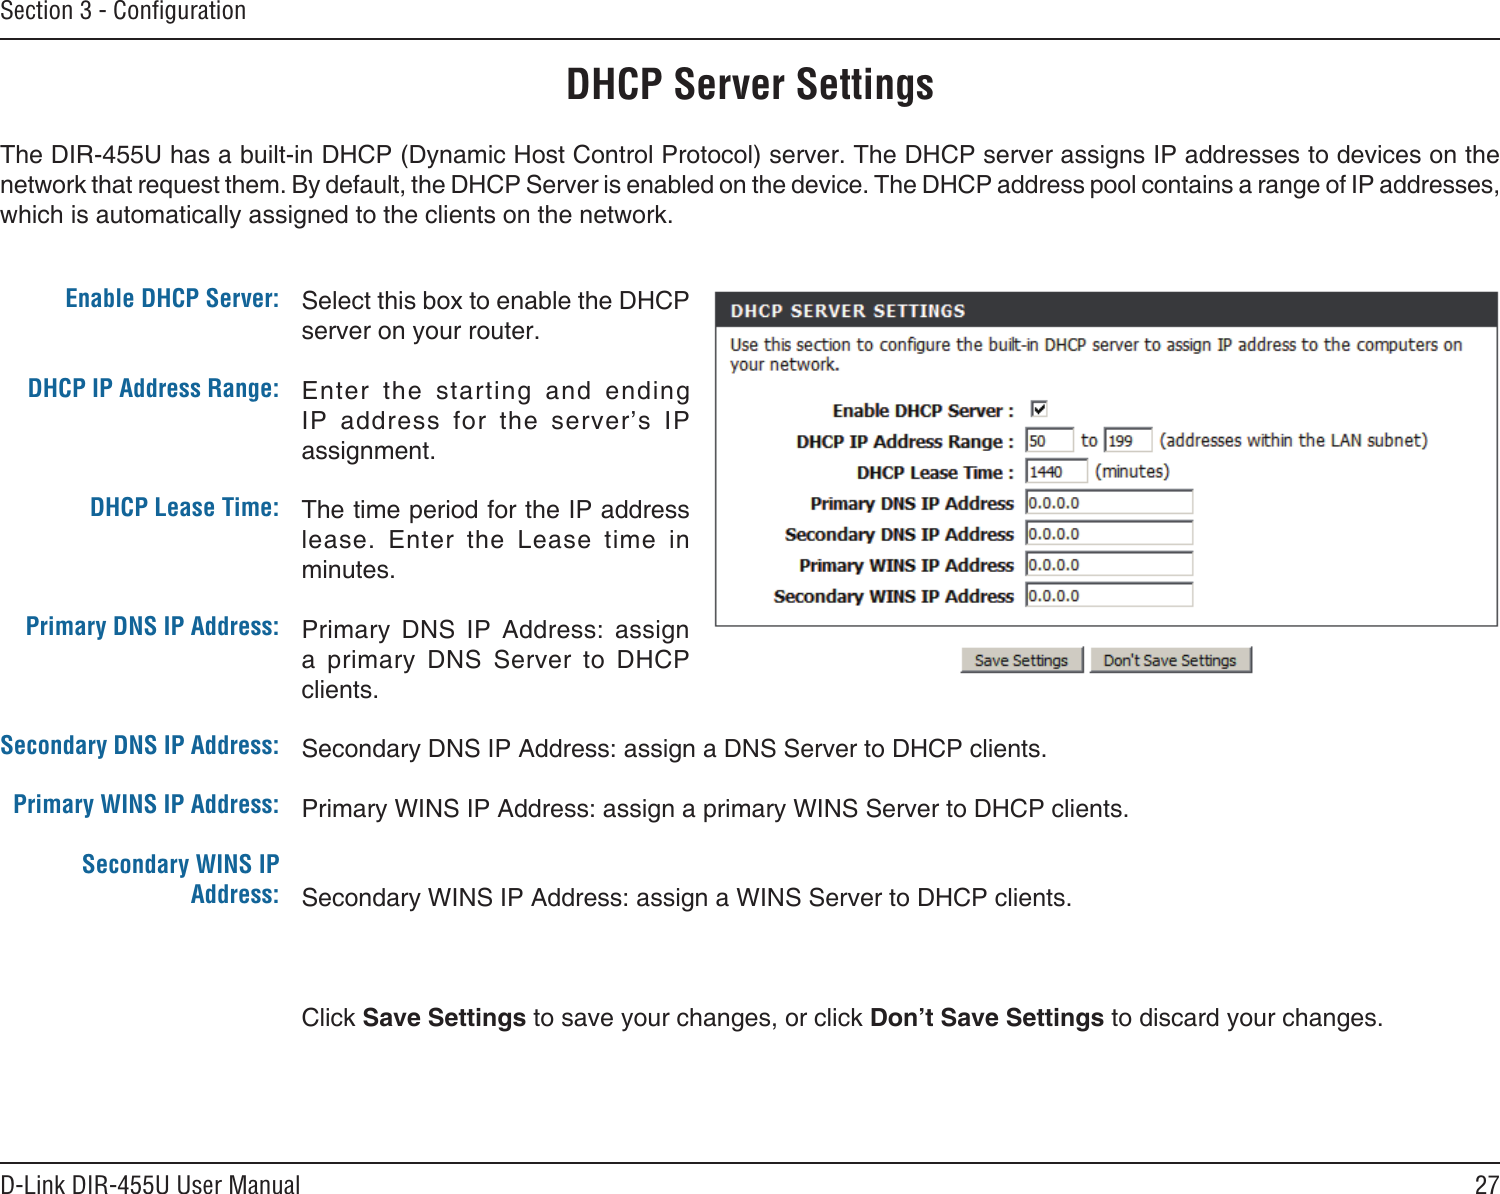 27D-Link DIR-455U User ManualSection 3 - ConﬁgurationSelect this box to enable the DHCP server on your router. Enter  the  starting  and  ending IP  address  for  the  server’s  IP assignment.The time period for the IP address lease.  Enter  the  Lease  time  in minutes.Primary  DNS  IP  Address:  assign a  primary  DNS  Server  to  DHCP clients.Secondary DNS IP Address: assign a DNS Server to DHCP clients.Primary WINS IP Address: assign a primary WINS Server to DHCP clients. Secondary WINS IP Address: assign a WINS Server to DHCP clients.Click Save Settings to save your changes, or click Don’t Save Settings to discard your changes.Enable DHCP Server: DHCP IP Address Range:DHCP Lease Time:Primary DNS IP Address:Secondary DNS IP Address:Primary WINS IP Address:Secondary WINS IP Address:DHCP Server SettingsThe DIR-455U has a built-in DHCP (Dynamic Host Control Protocol) server. The DHCP server assigns IP addresses to devices on the network that request them. By default, the DHCP Server is enabled on the device. The DHCP address pool contains a range of IP addresses, which is automatically assigned to the clients on the network.